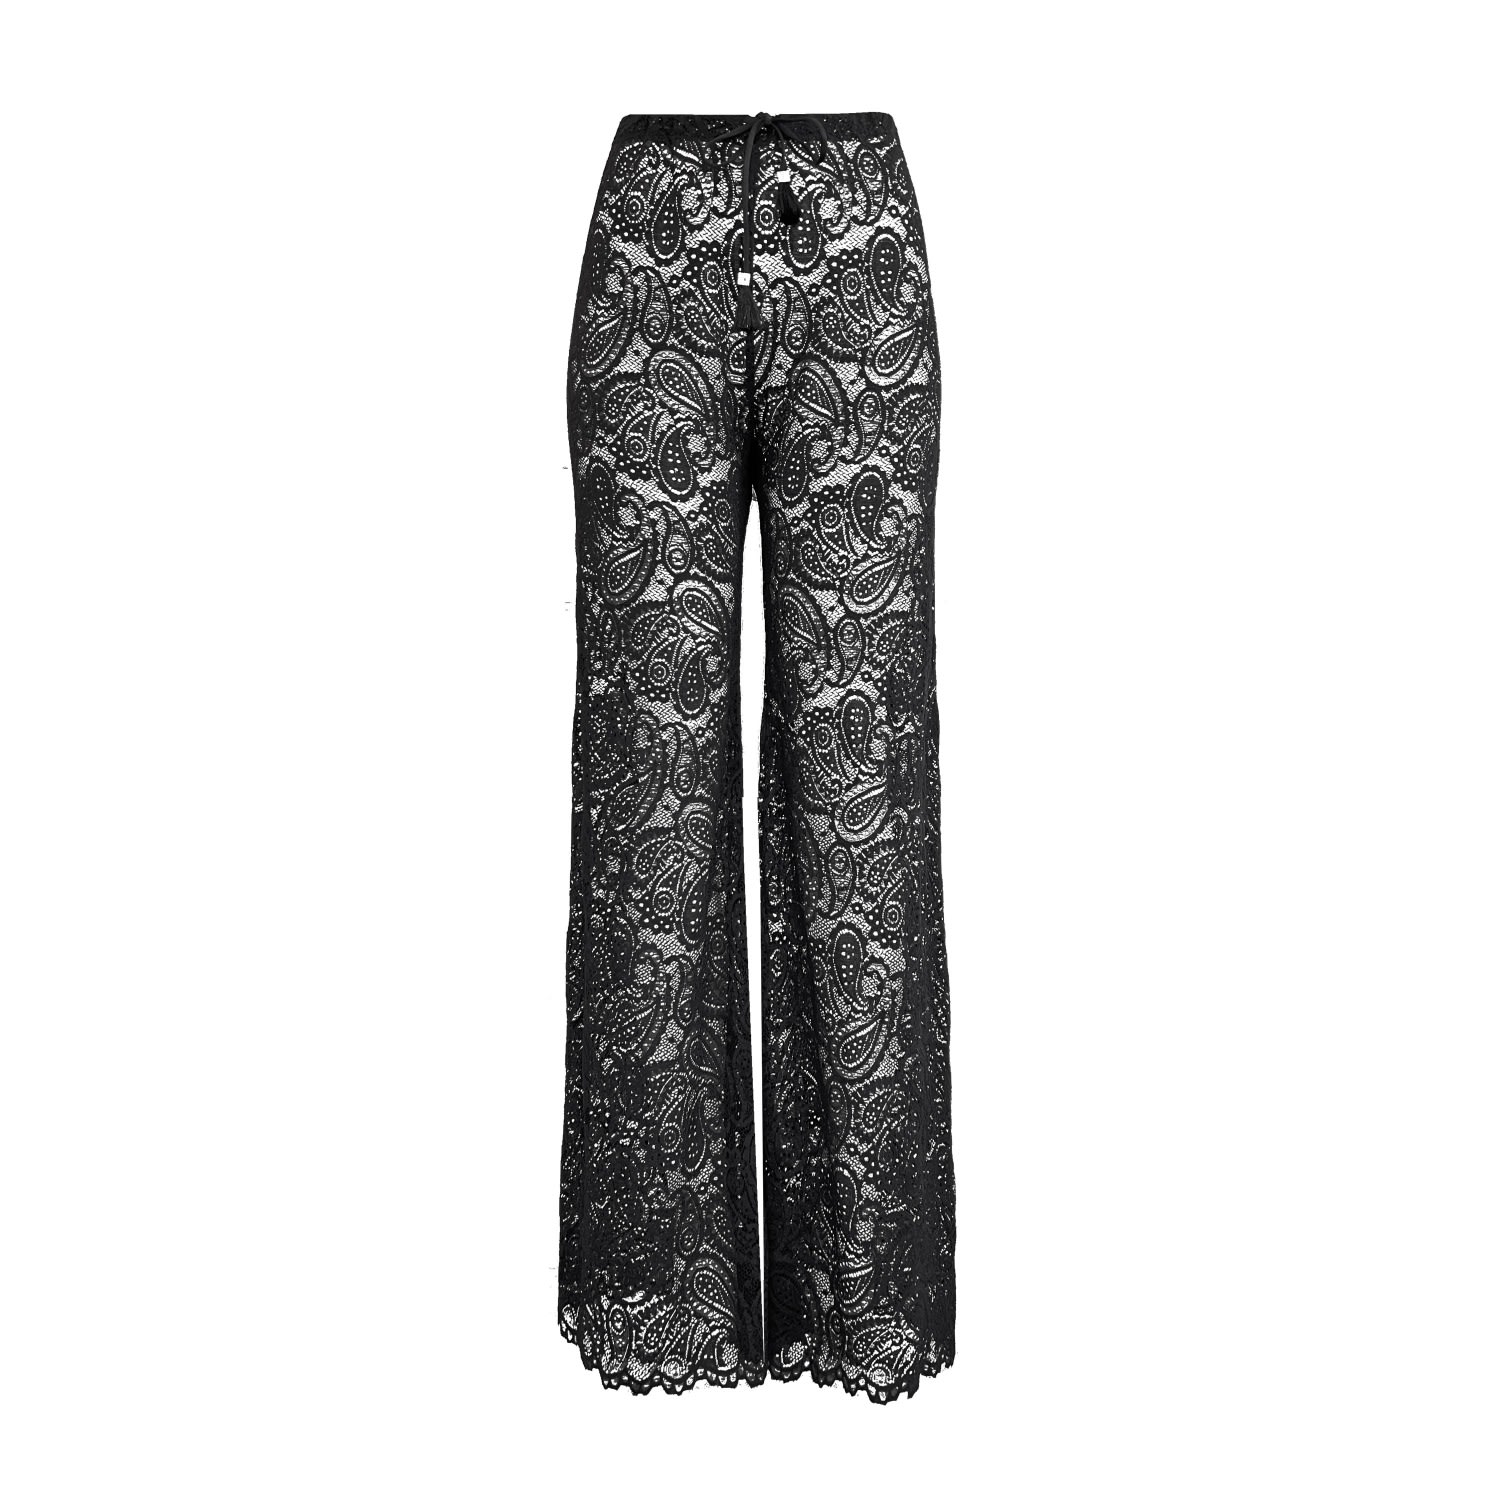 Women's Black Lace Wide Leg Trousers Pants With A Paisley Motif Small ELIN RITTER IBIZA